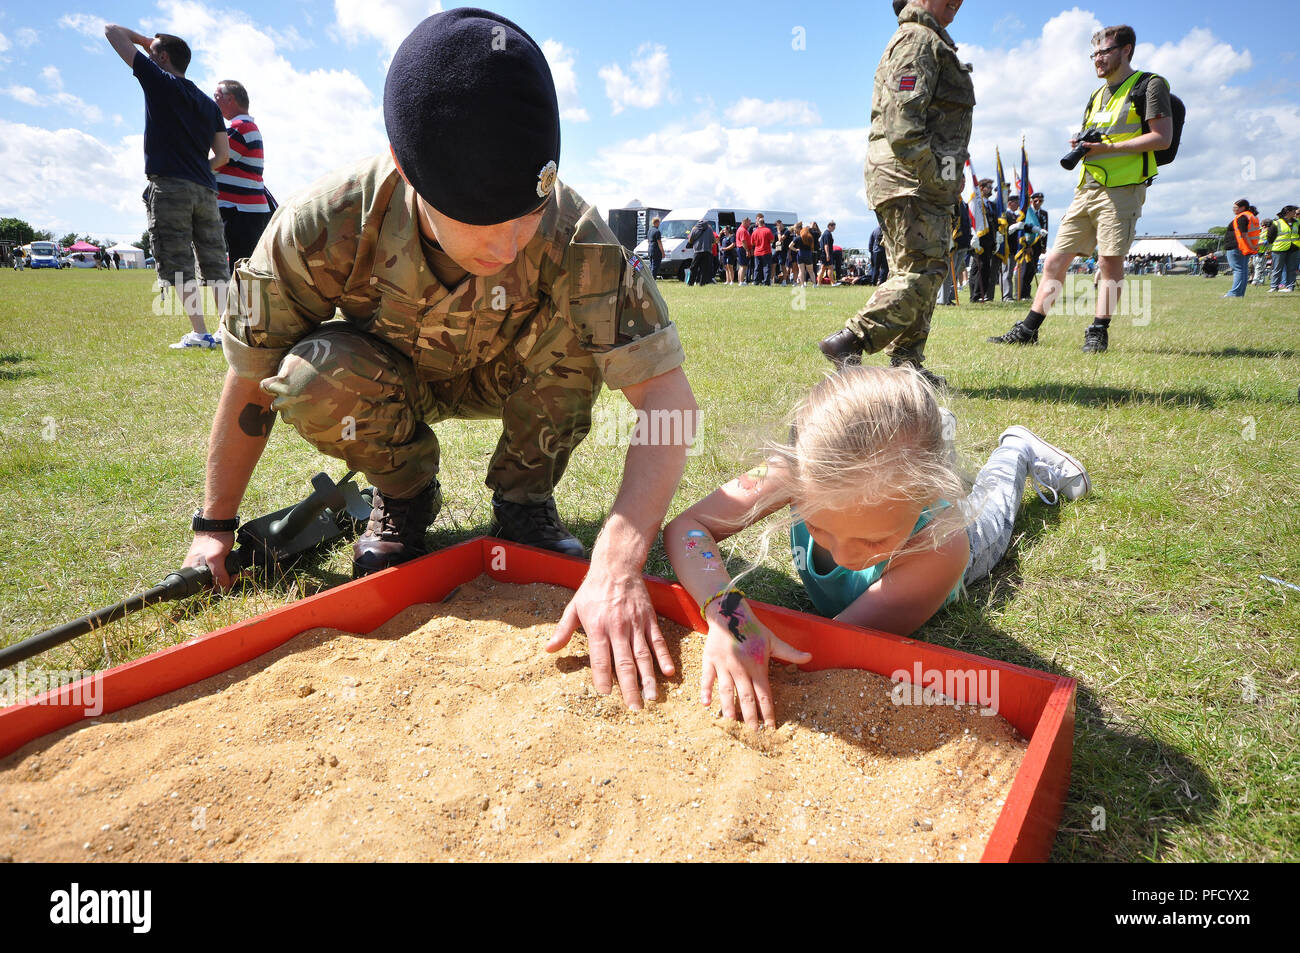 British soldier demonstrating mine detection to a child. Public relations event. 33 engineer regiment. Military. Armed forces event Stock Photo